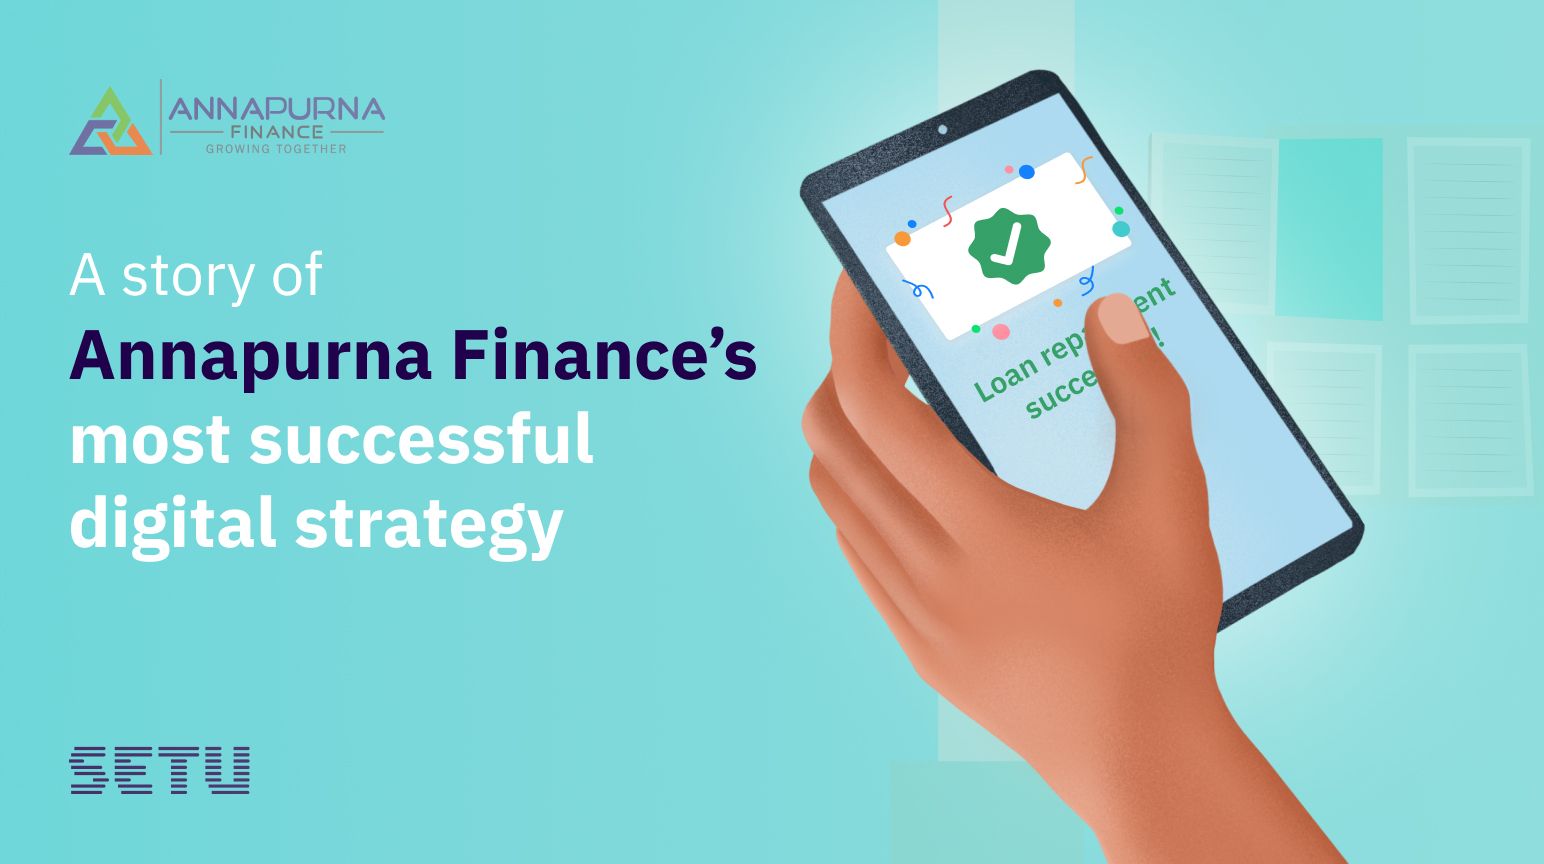 A story of Annapurna Finance's most successful digital strategy title image